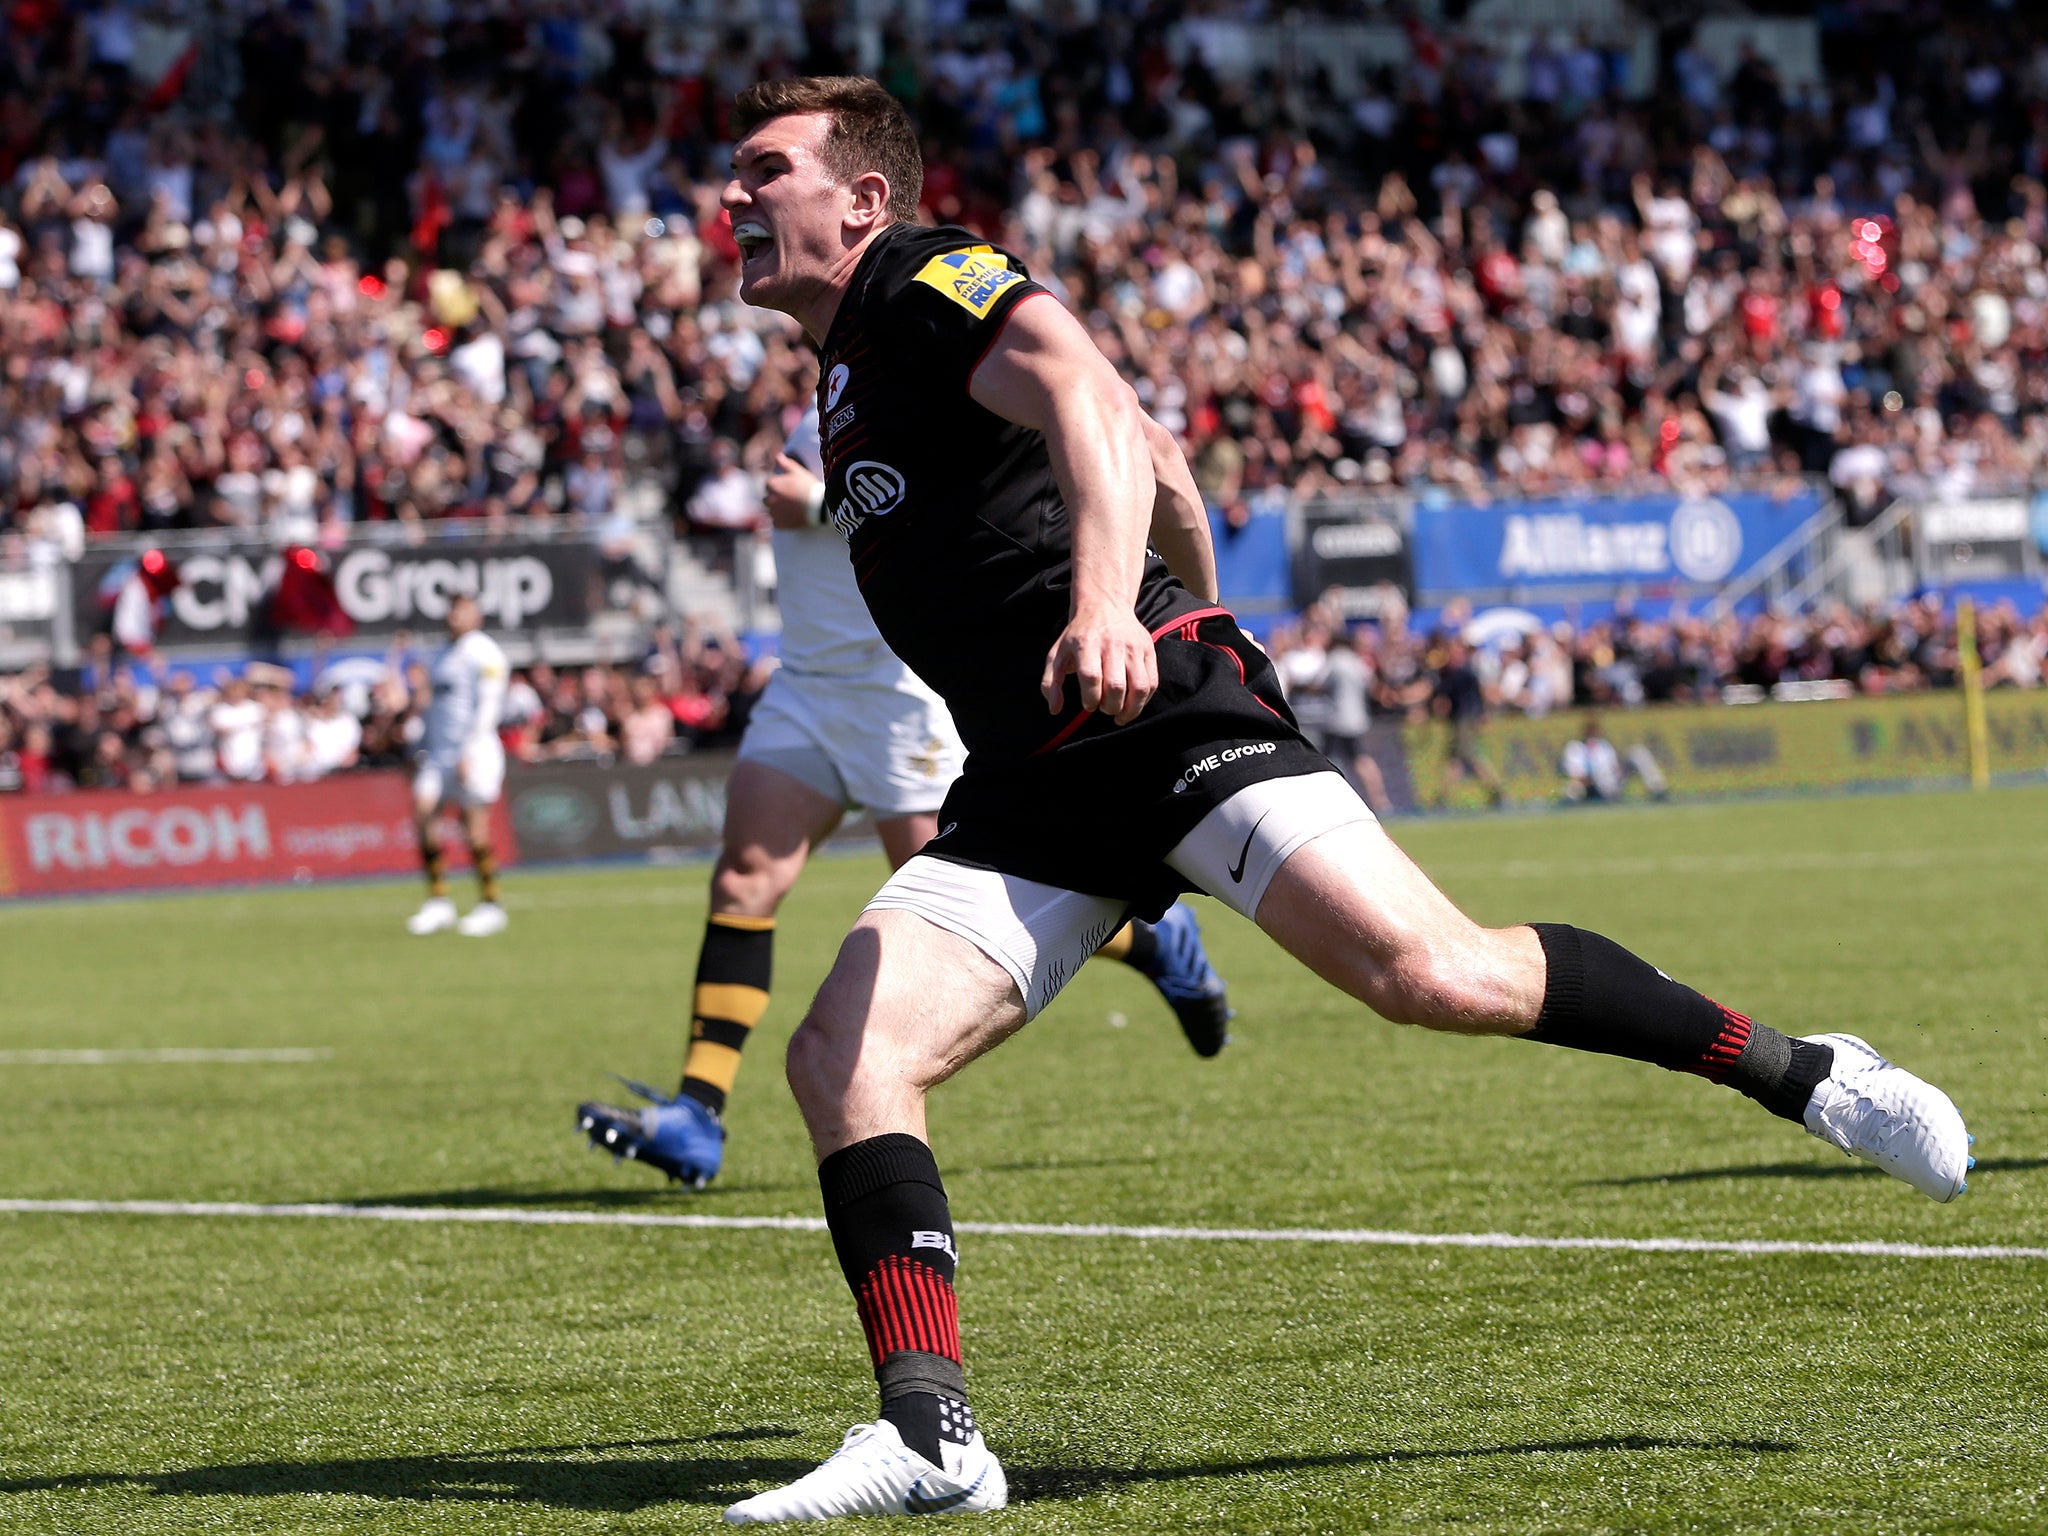 Ben Spencer celebrates scoring a try in Saracens' 57-33 semi-final victory over Wasps